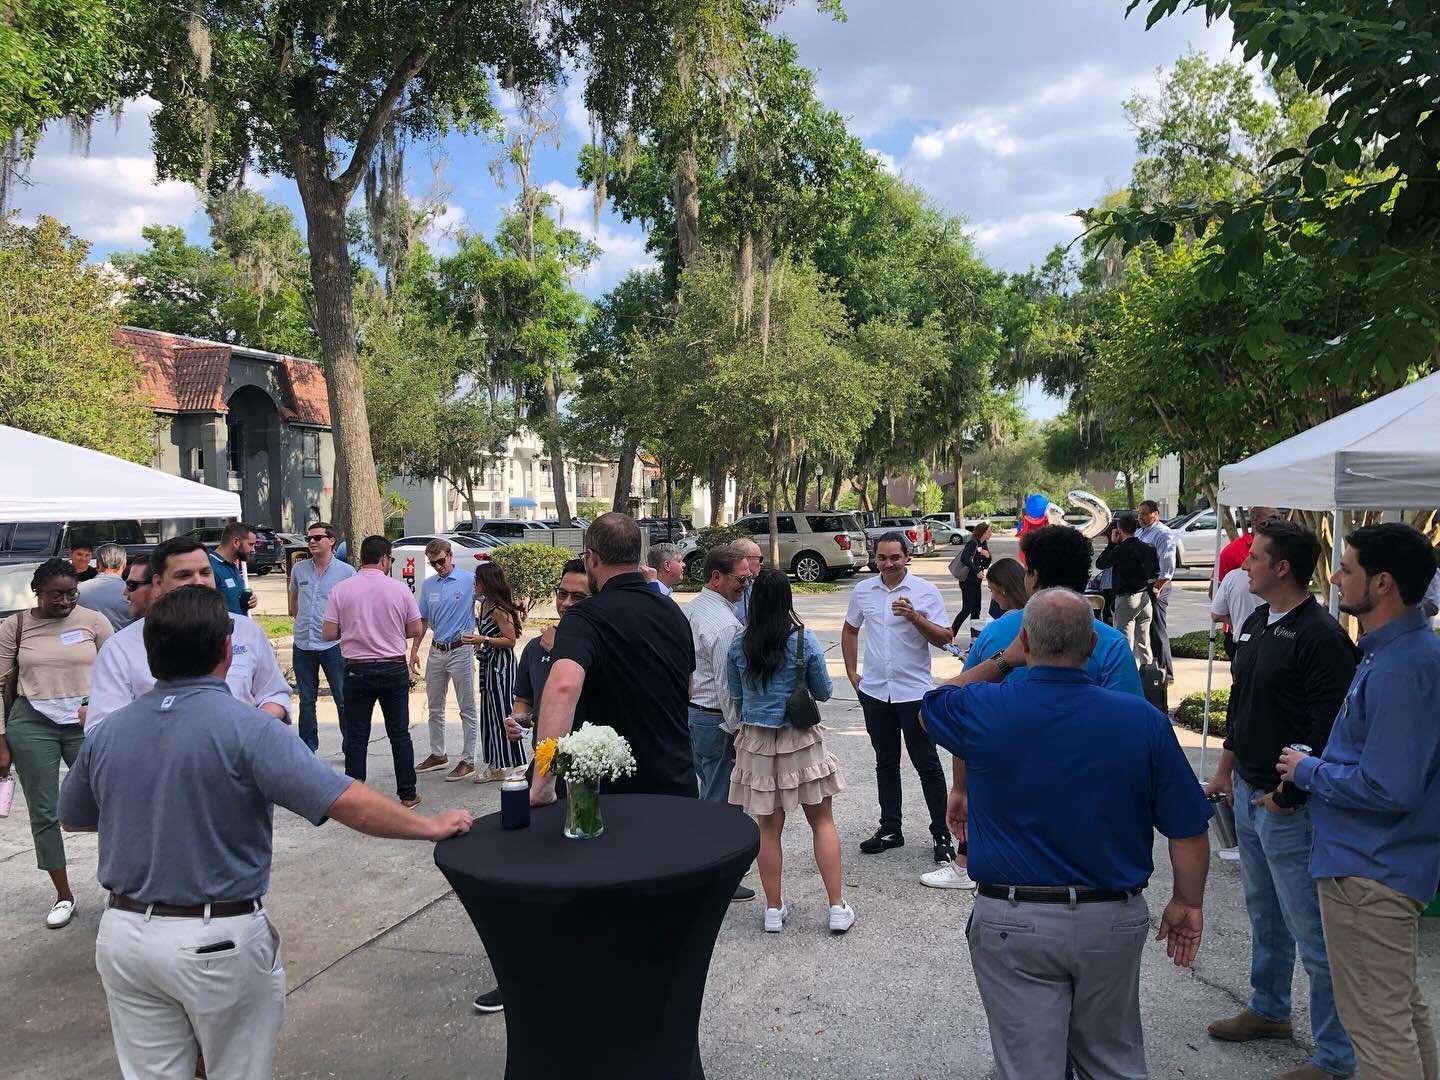 Thank you to all who joined us at our Orlando Open House last Thursday! It was a blast reconnecting and enjoying a delicious low-country boil from King Cajun, @officialkingcajun. Special thanks to @huntonbrady and @dprconstruction for bringing our ne